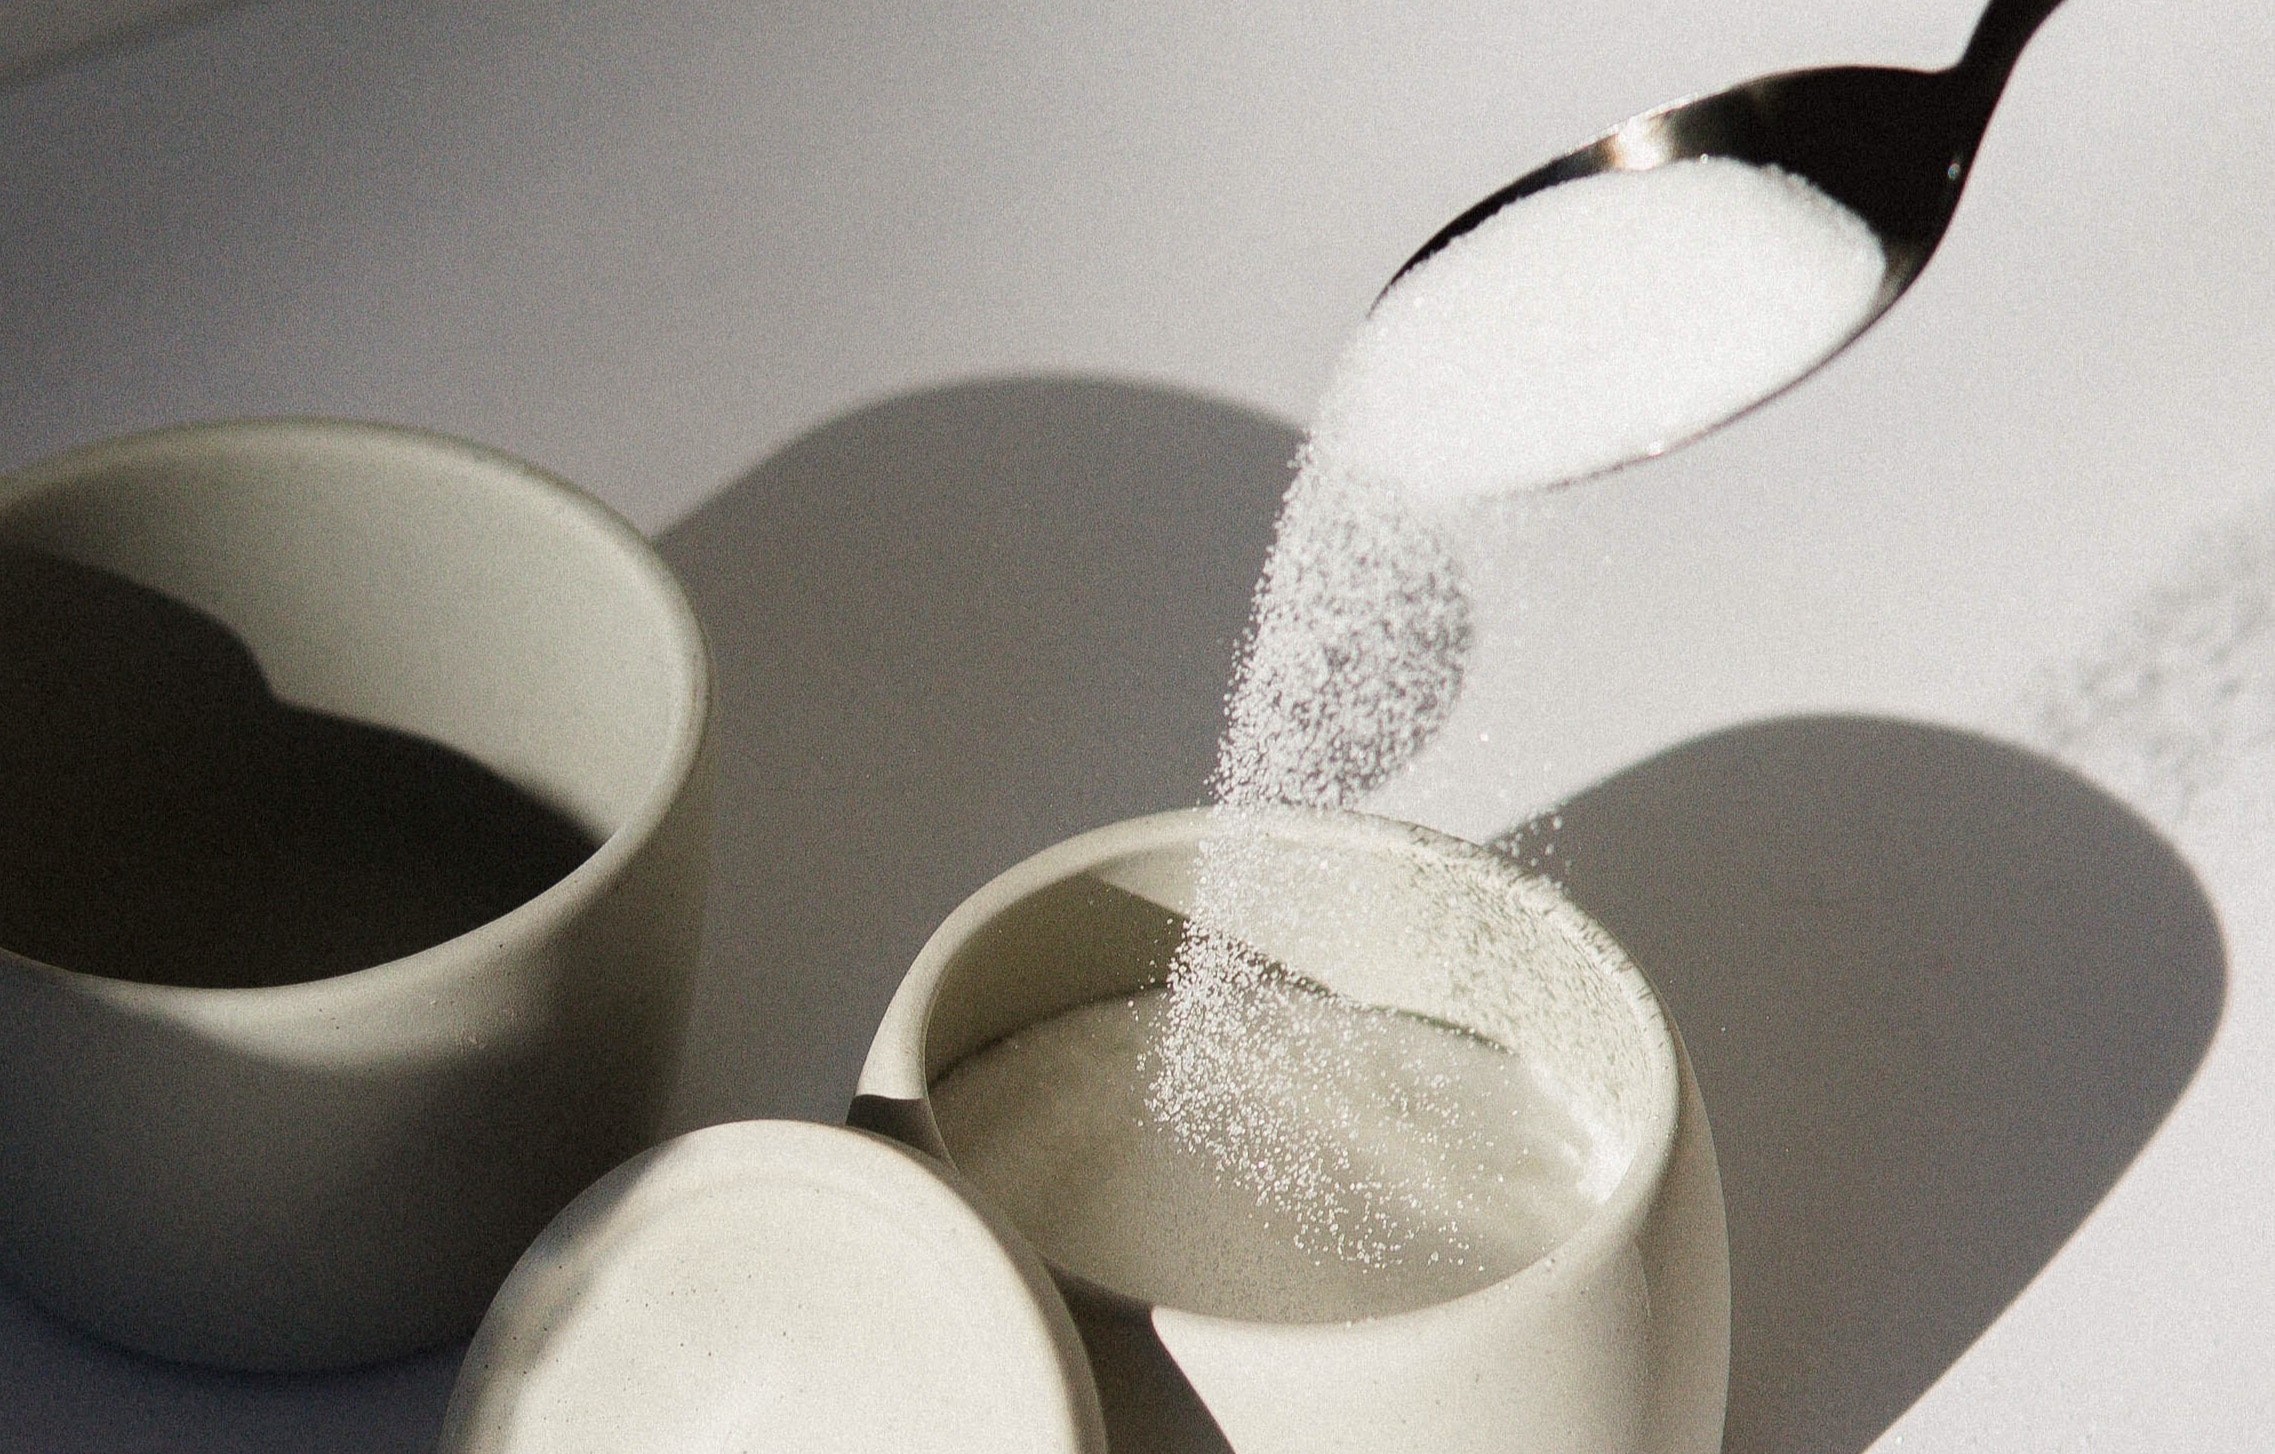 Photograph of sugar being poured into a bowl.